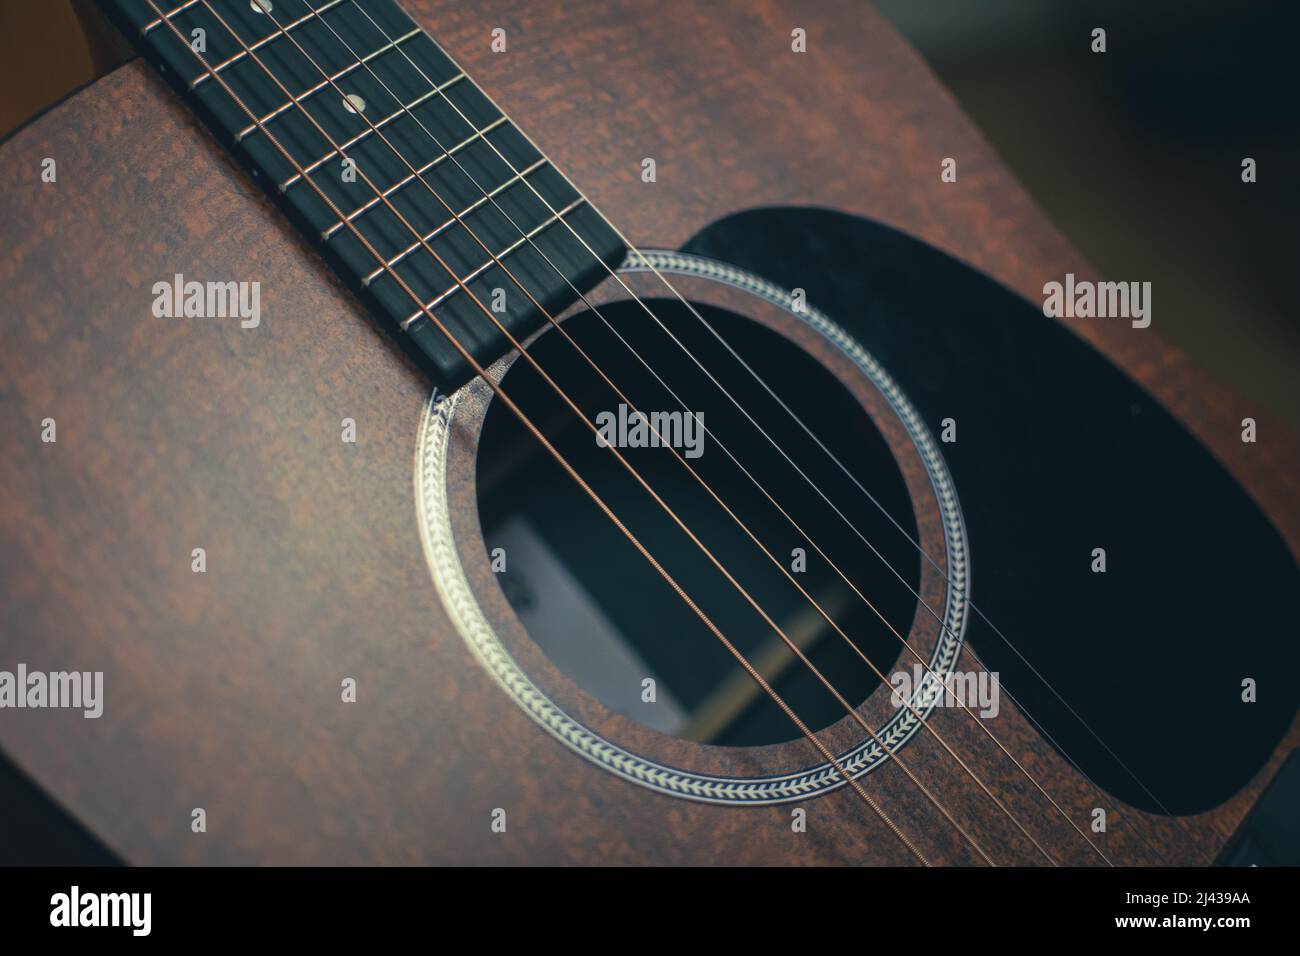 A high angle view of the body of an acoustic guitar with the pickguard, sound hole, steel strings and fretboard visible. Stock Photo